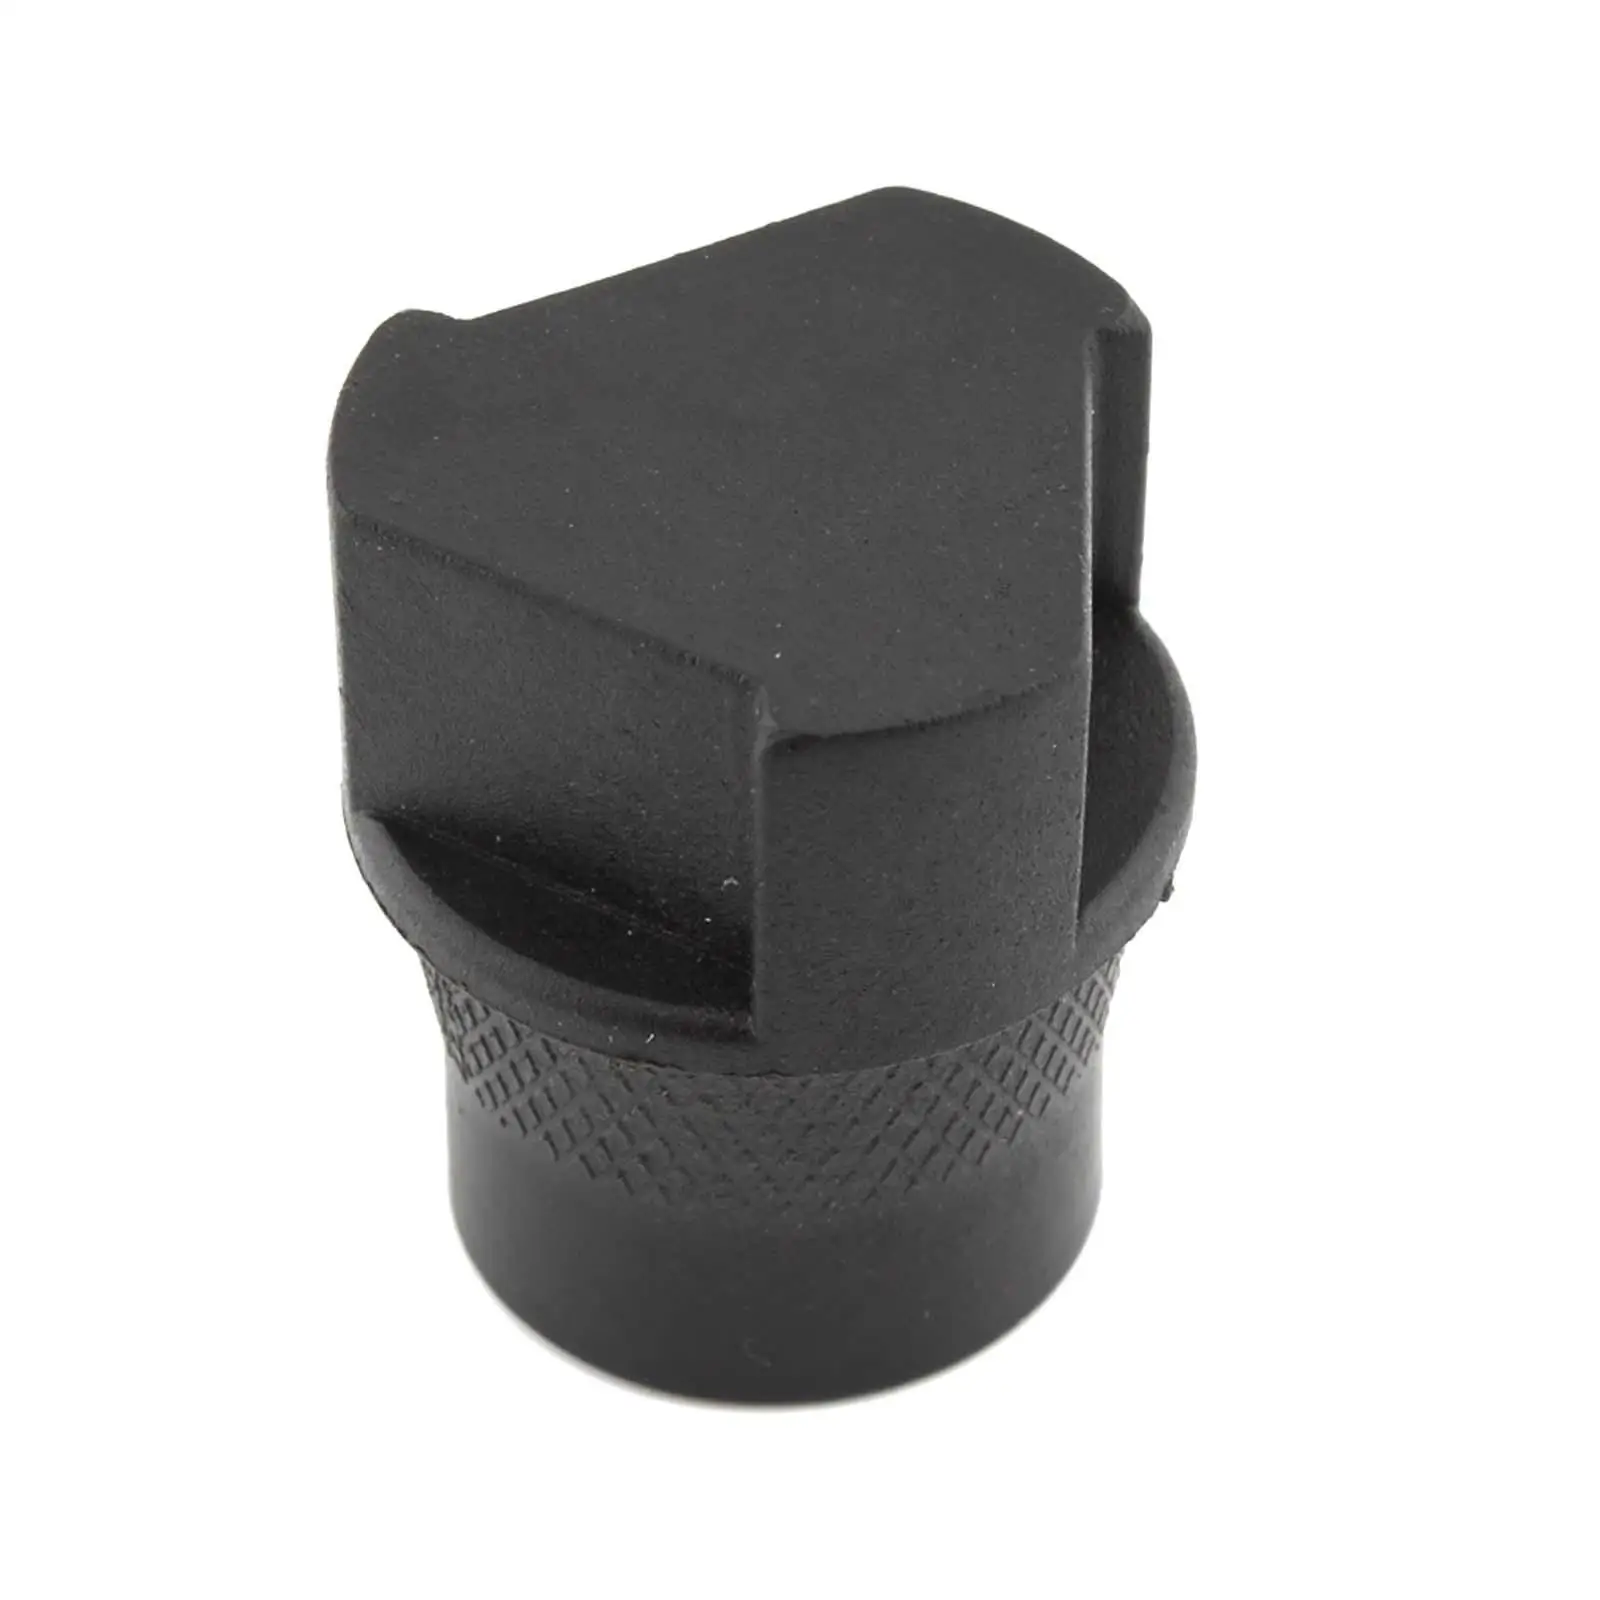 Engine Oil filter Socket Removal Tool for BMW /Adventure R1250GS R1200R R1250RT